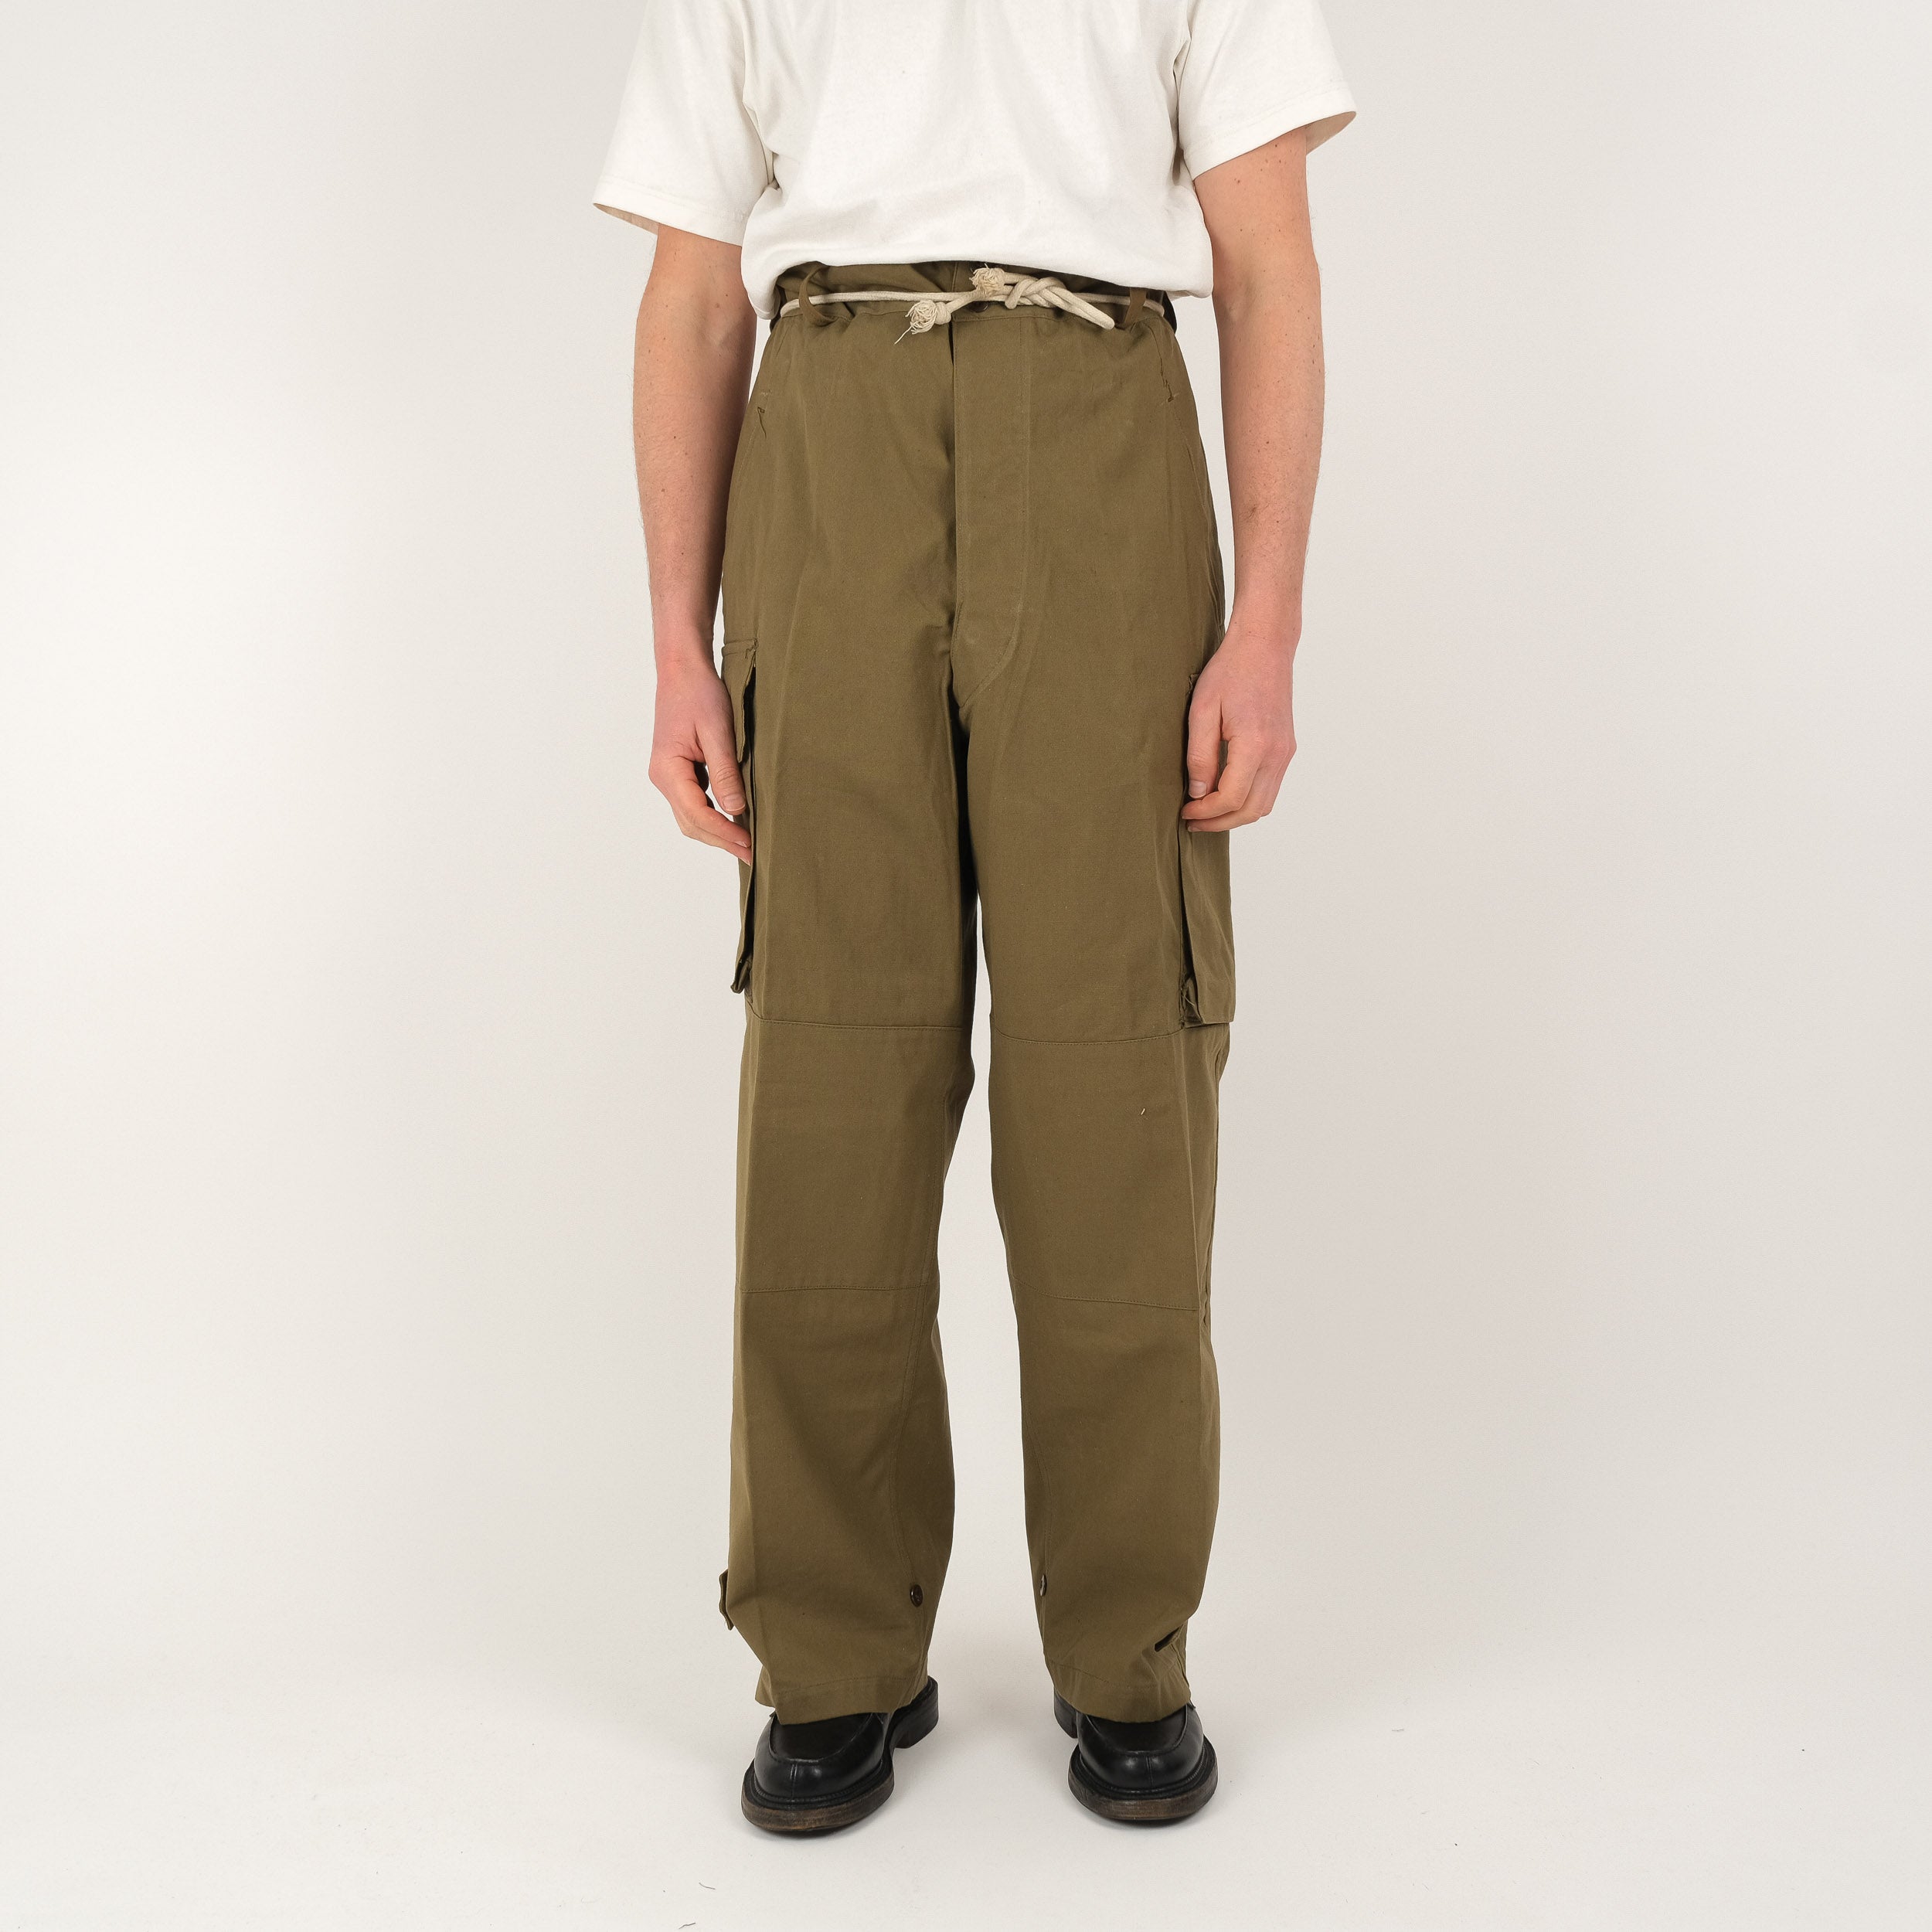 M47 FRENCH PANTS - TAG 35